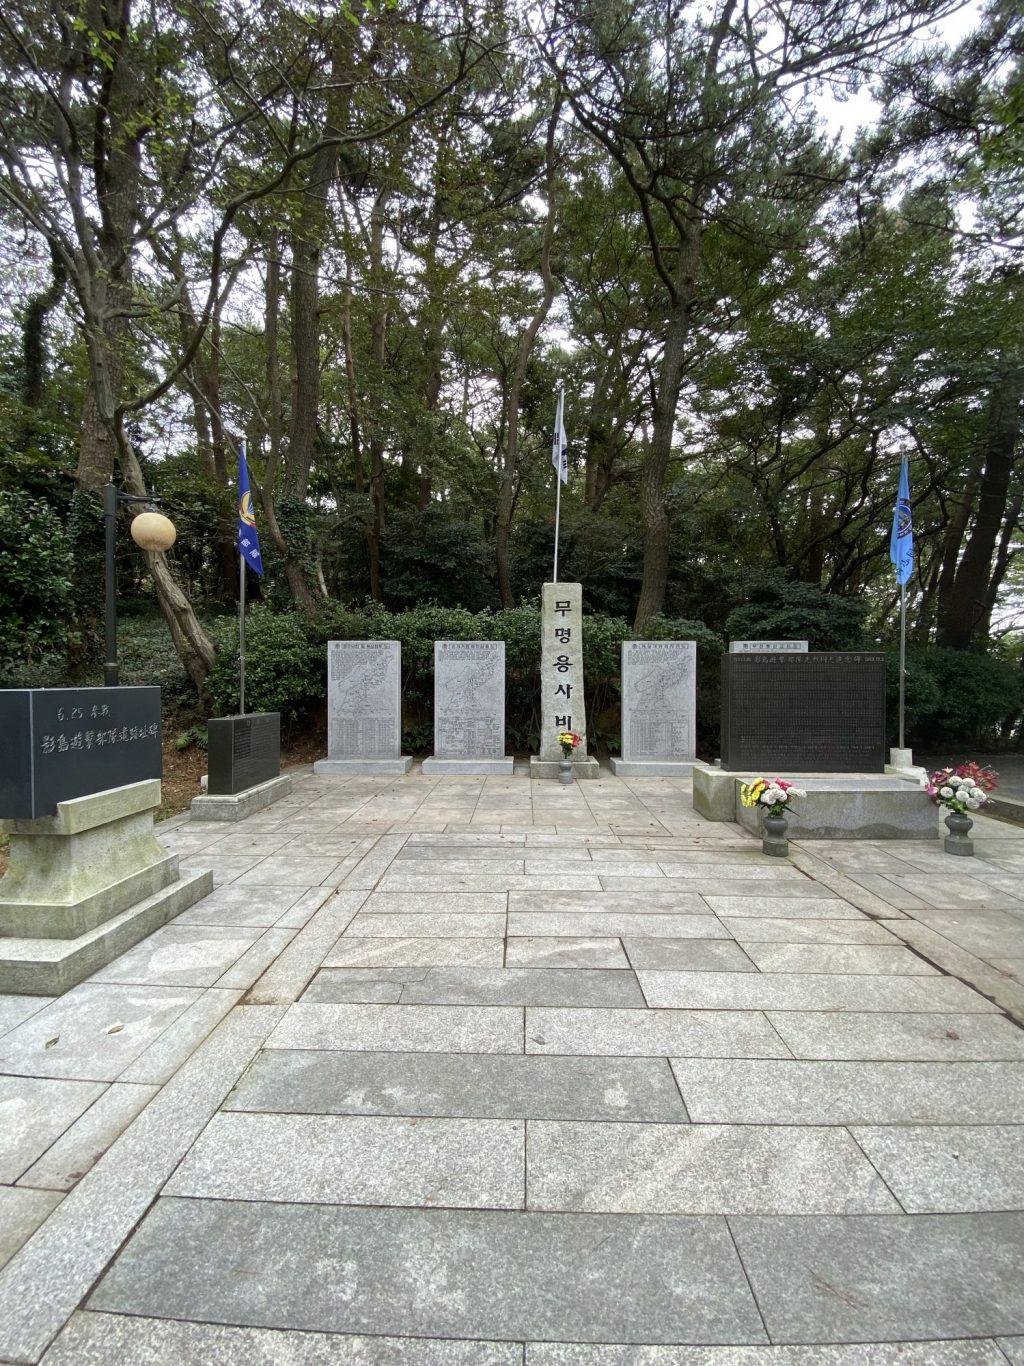 The tallest monument in the center reads "Mu-myeong-yong-sa-bi," which means unknown soldier at Taejongdae Geopark on Oct. 4. After visiting this memorial, I grew a deeper respect for the soldiers who fought for South Korea with tenacity.